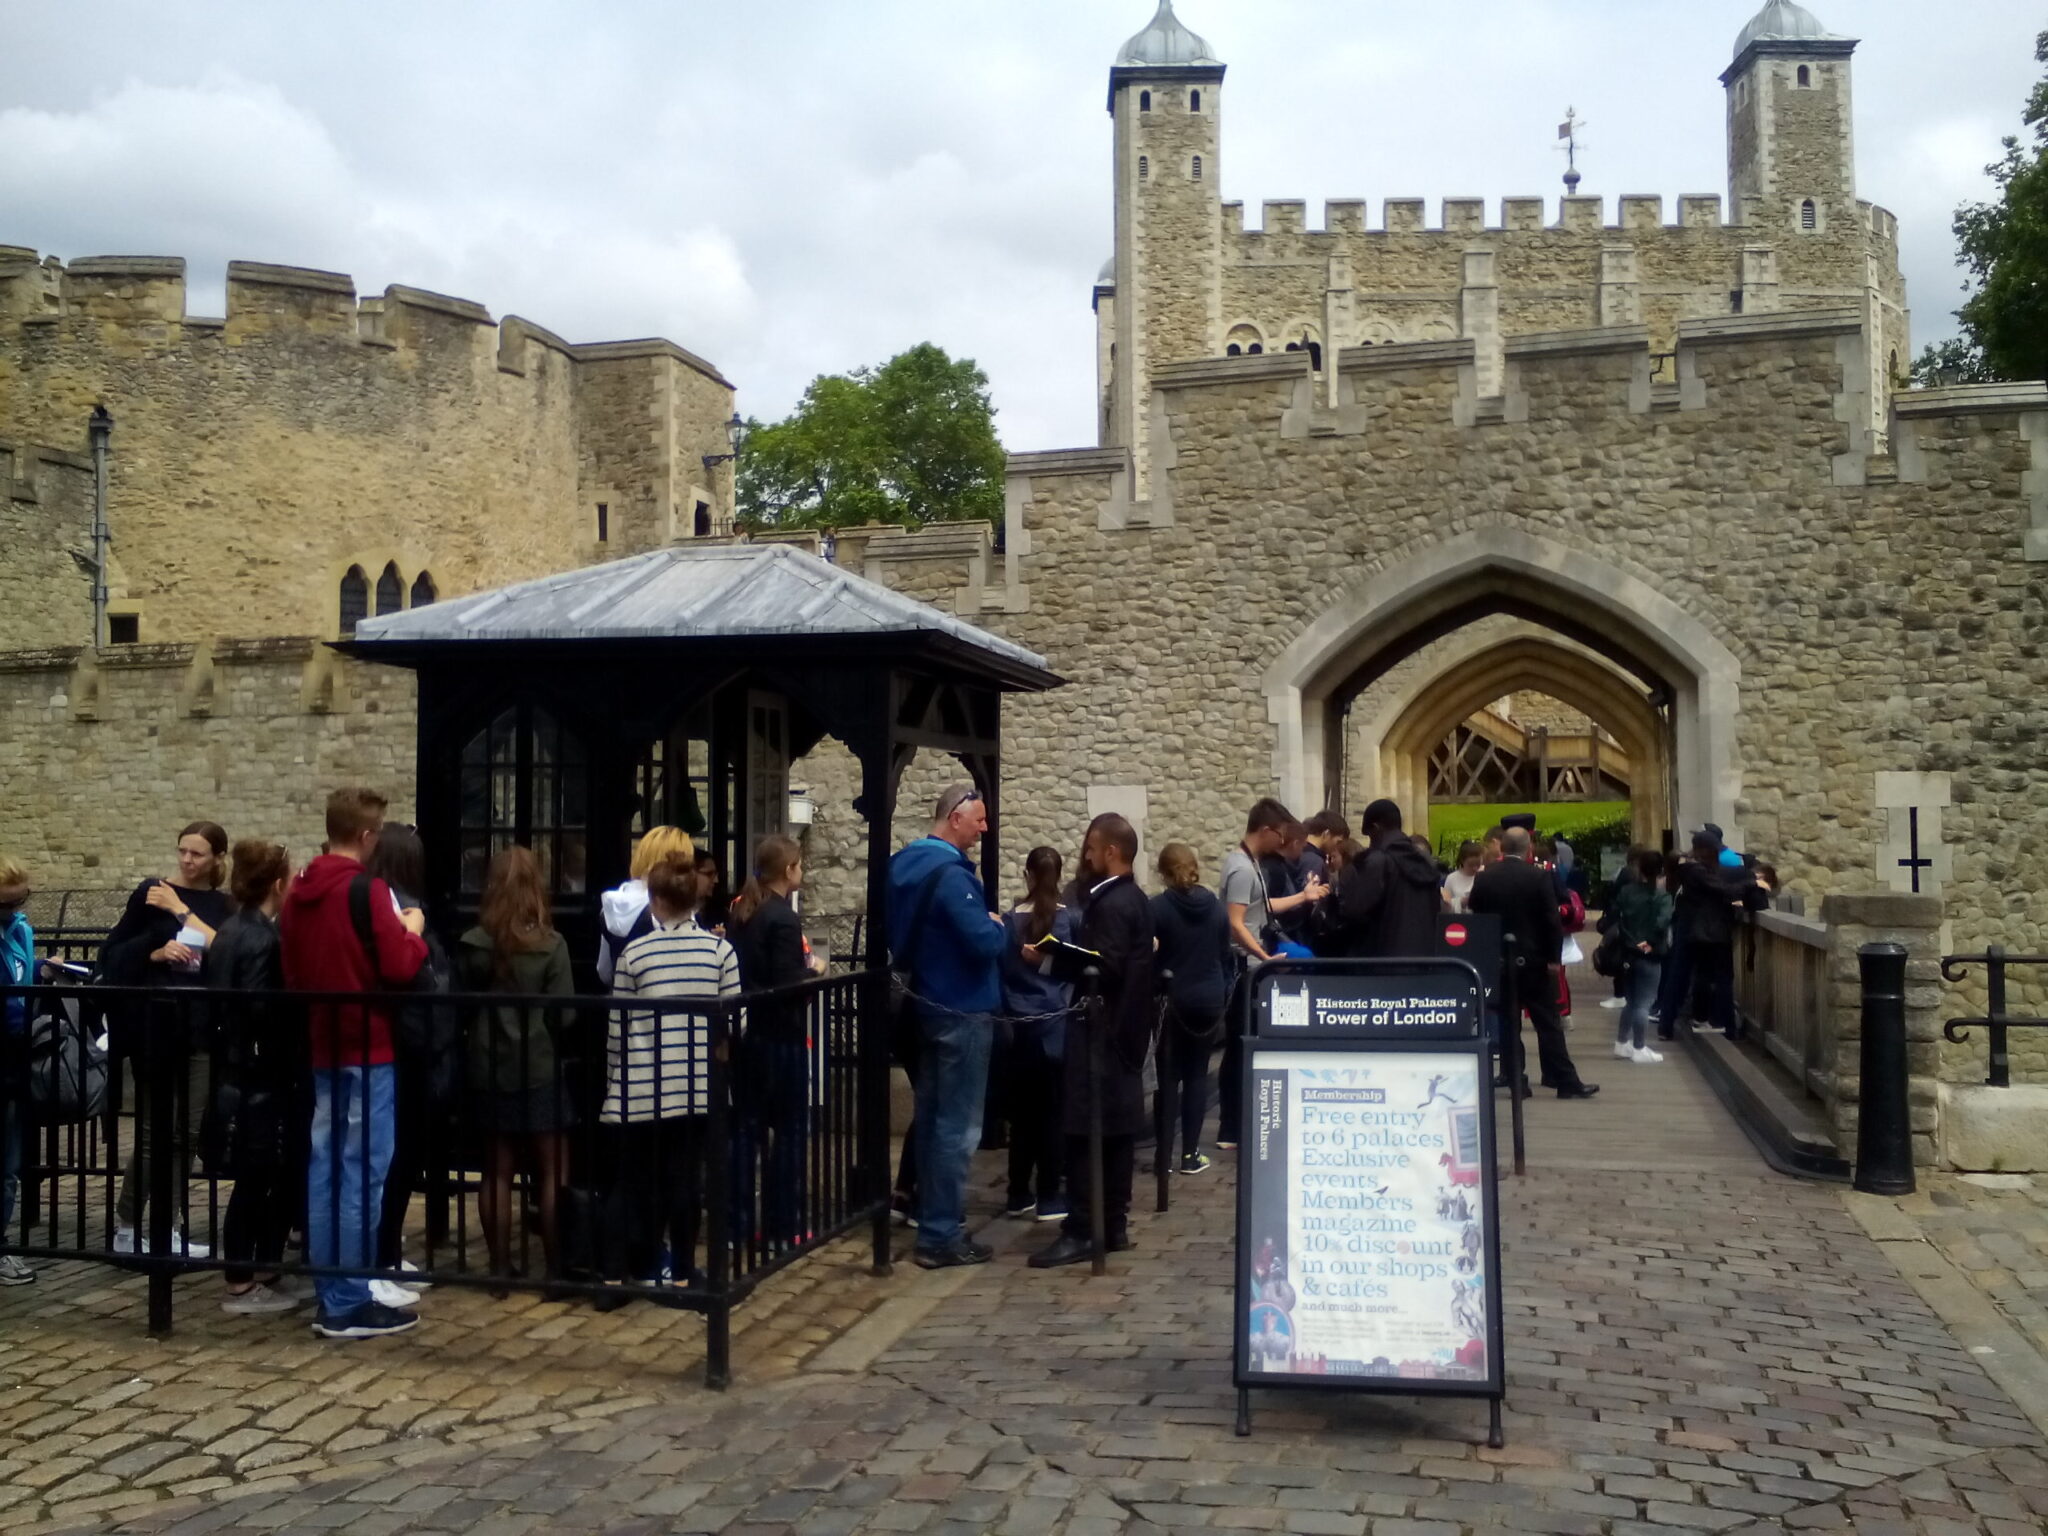 Tourists flocking at the ticket booth and the entrance to the Tower of London.